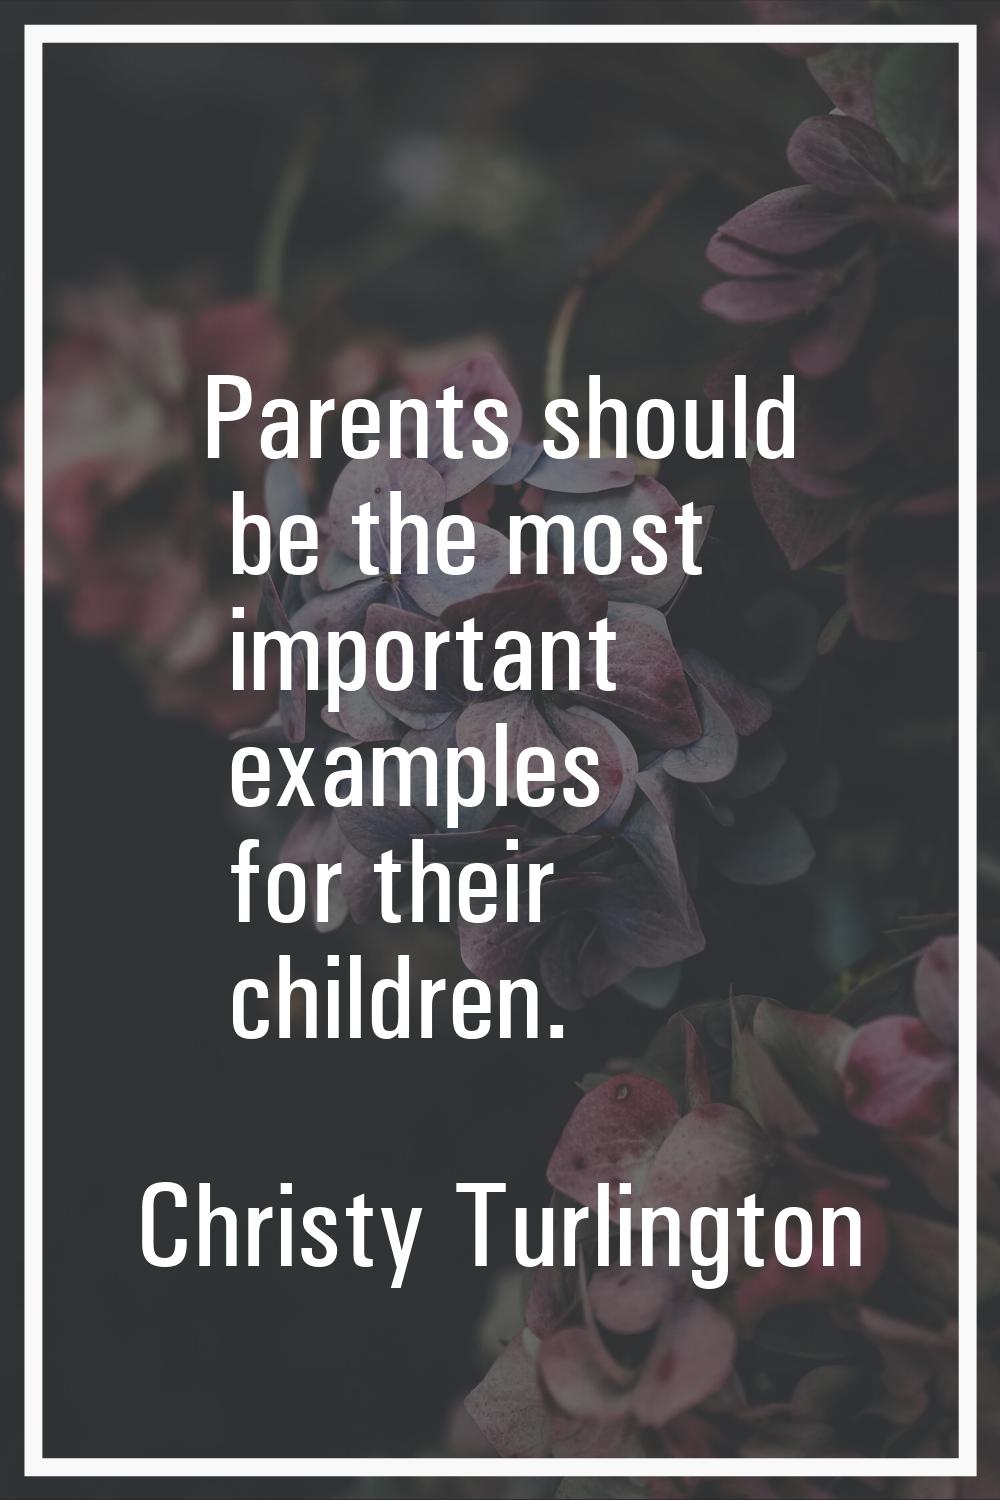 Parents should be the most important examples for their children.